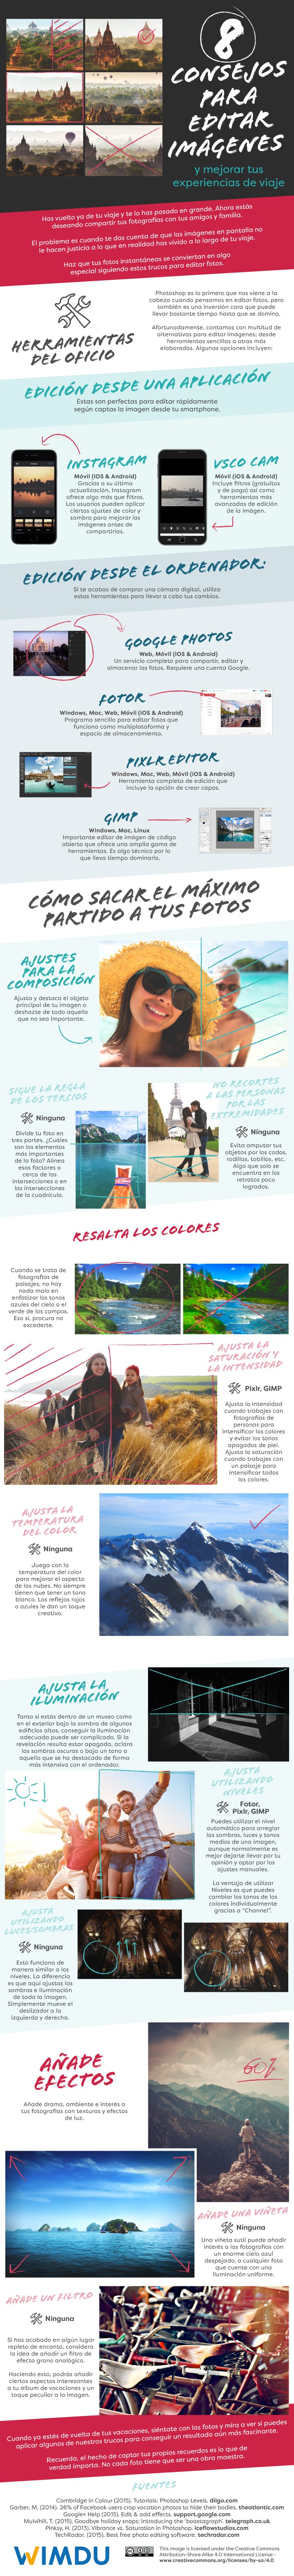 8-image-editing-tips-to-improve-your-travel-photos-SPANISH